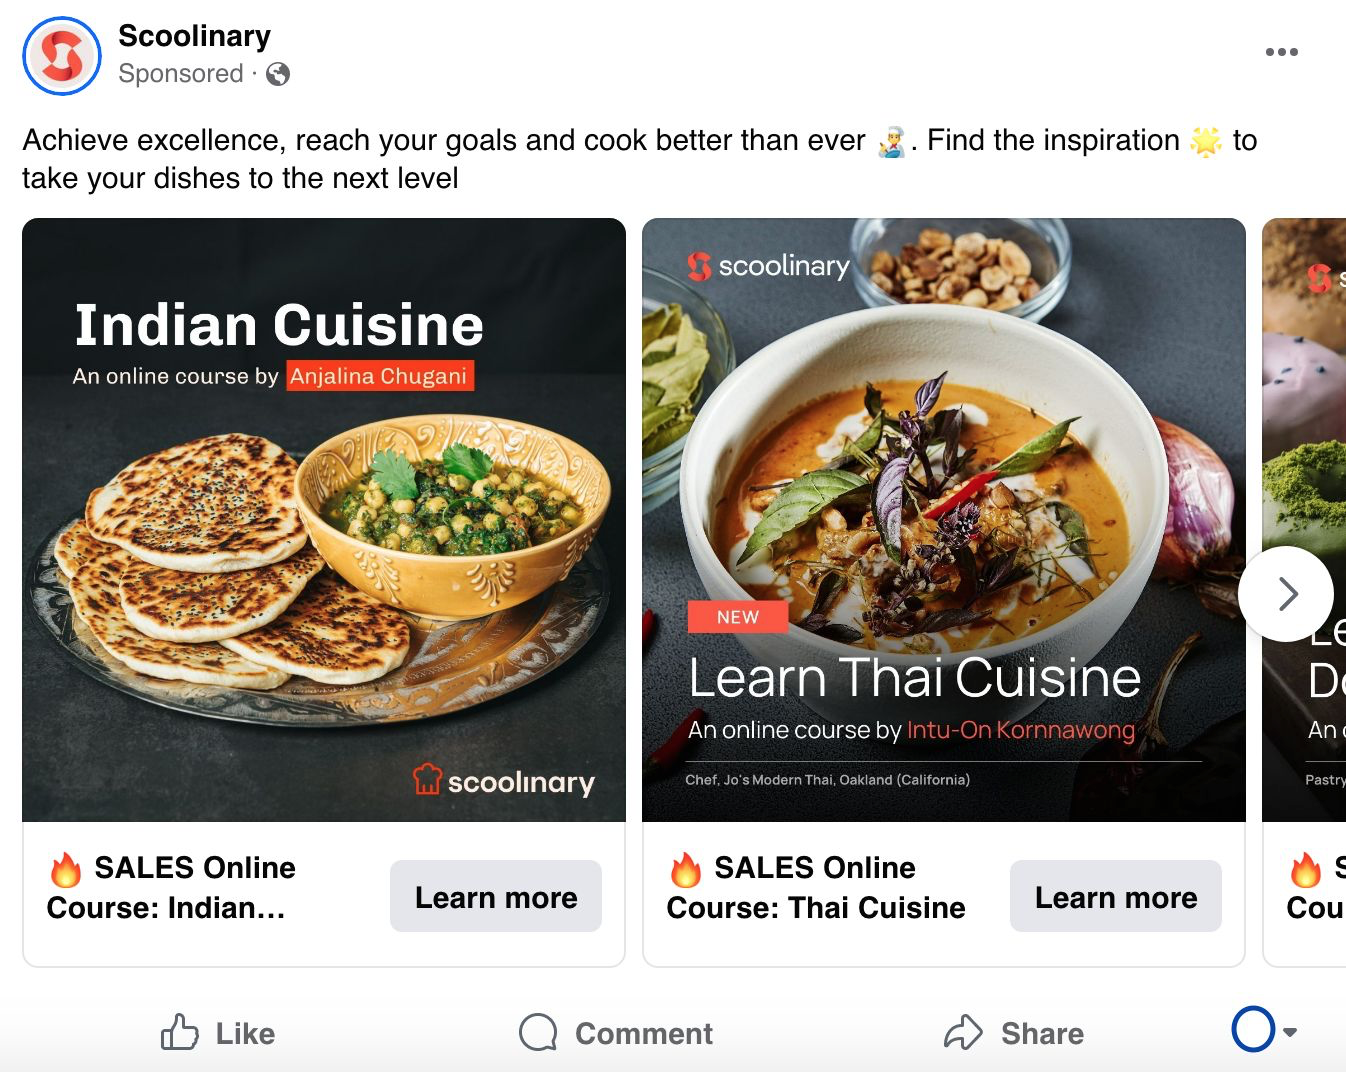 A carousel advertisement  connected  Facebook from Scoolinary